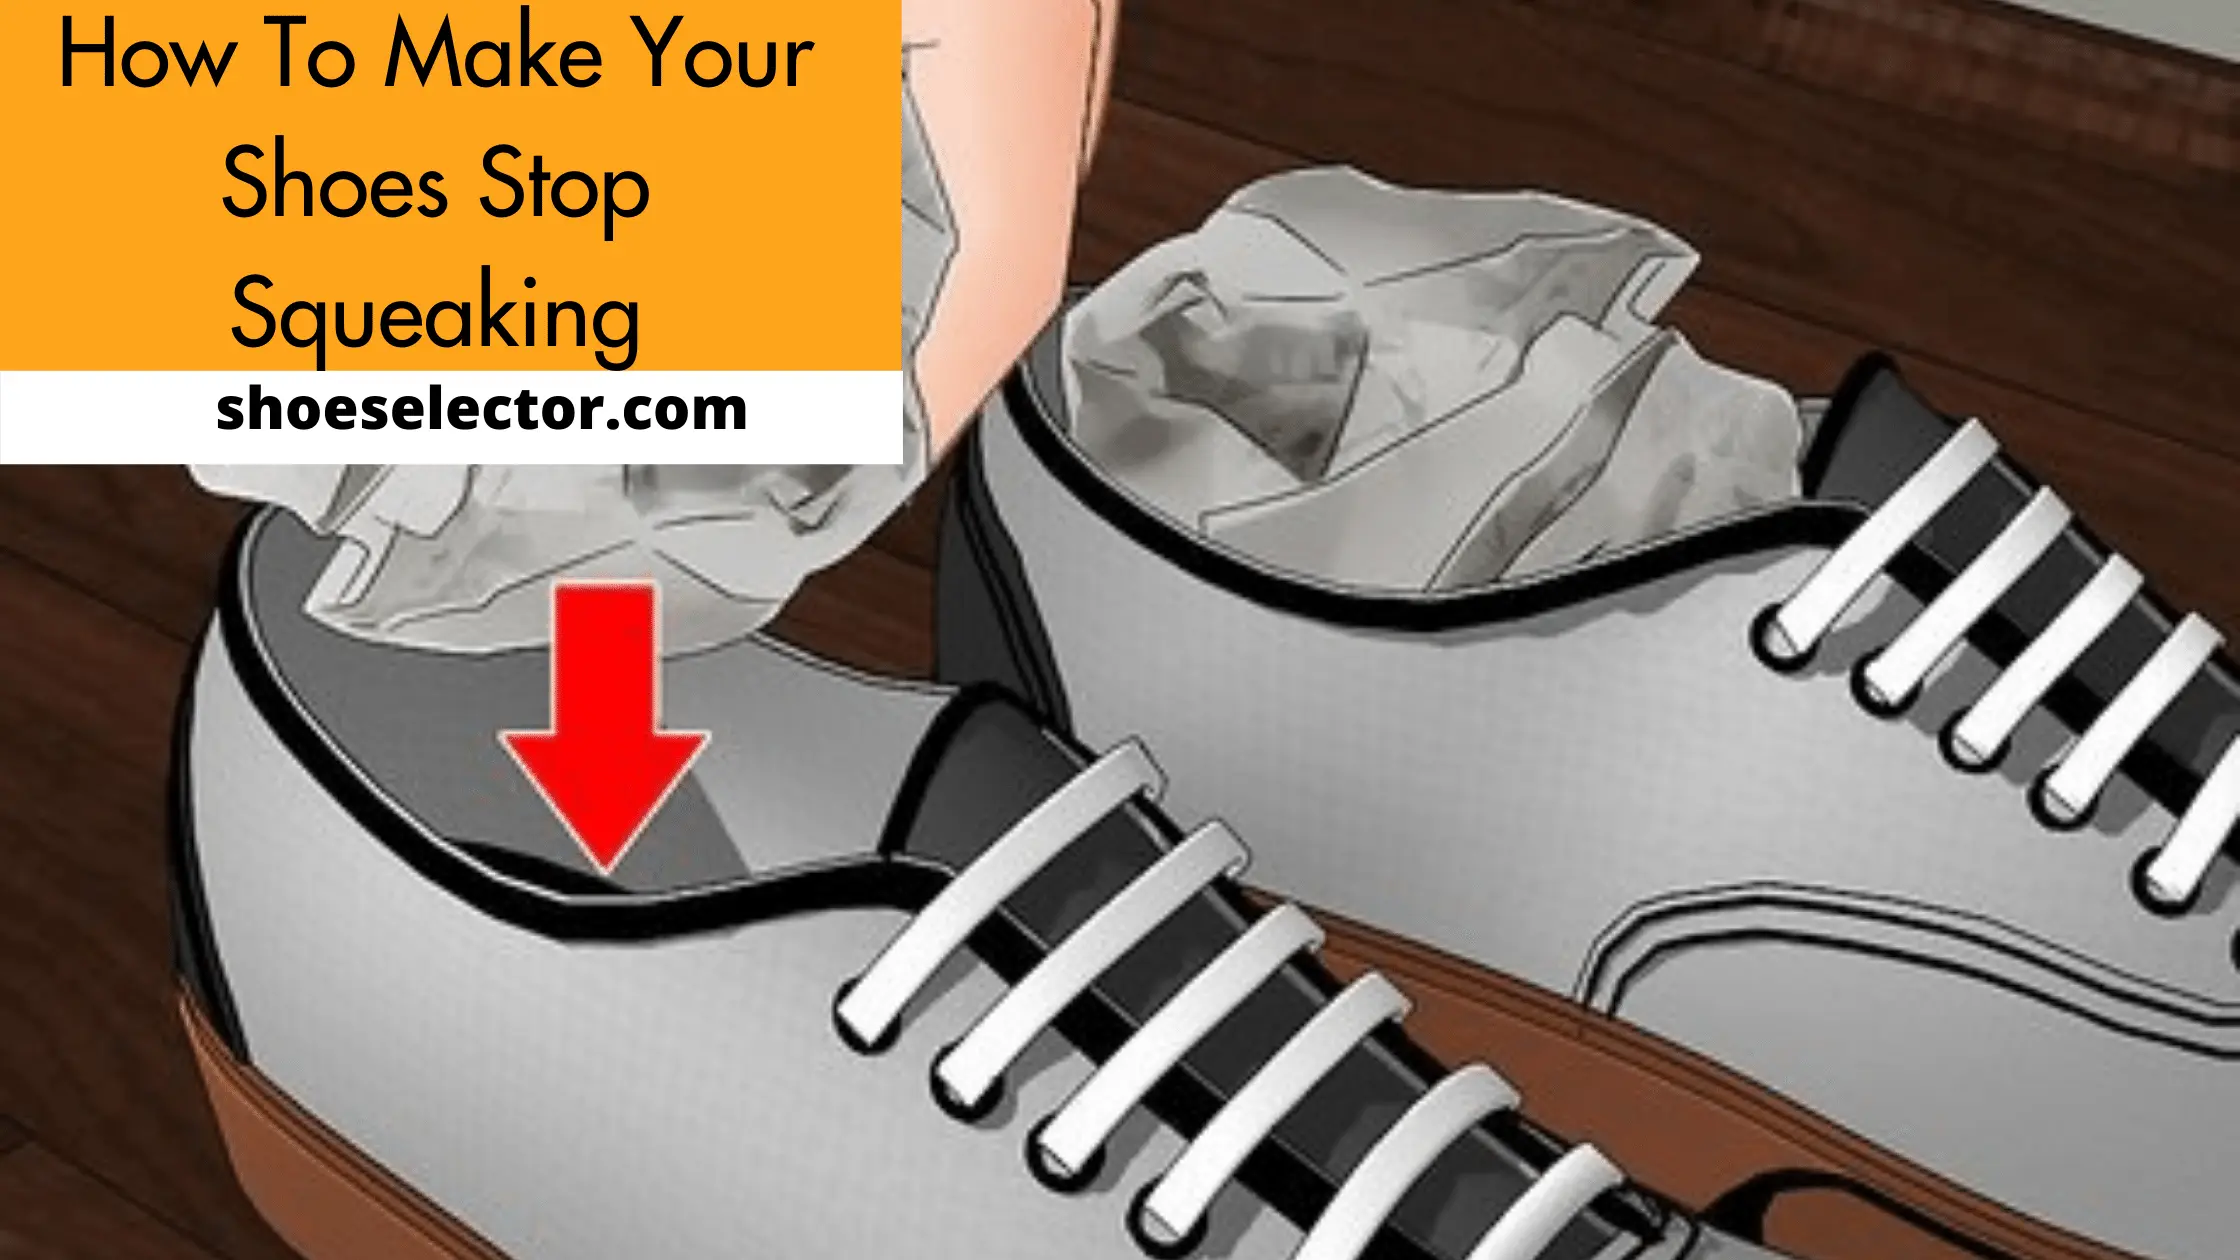 How To Make Your Shoes Stop Squeaking? - Latest Guide